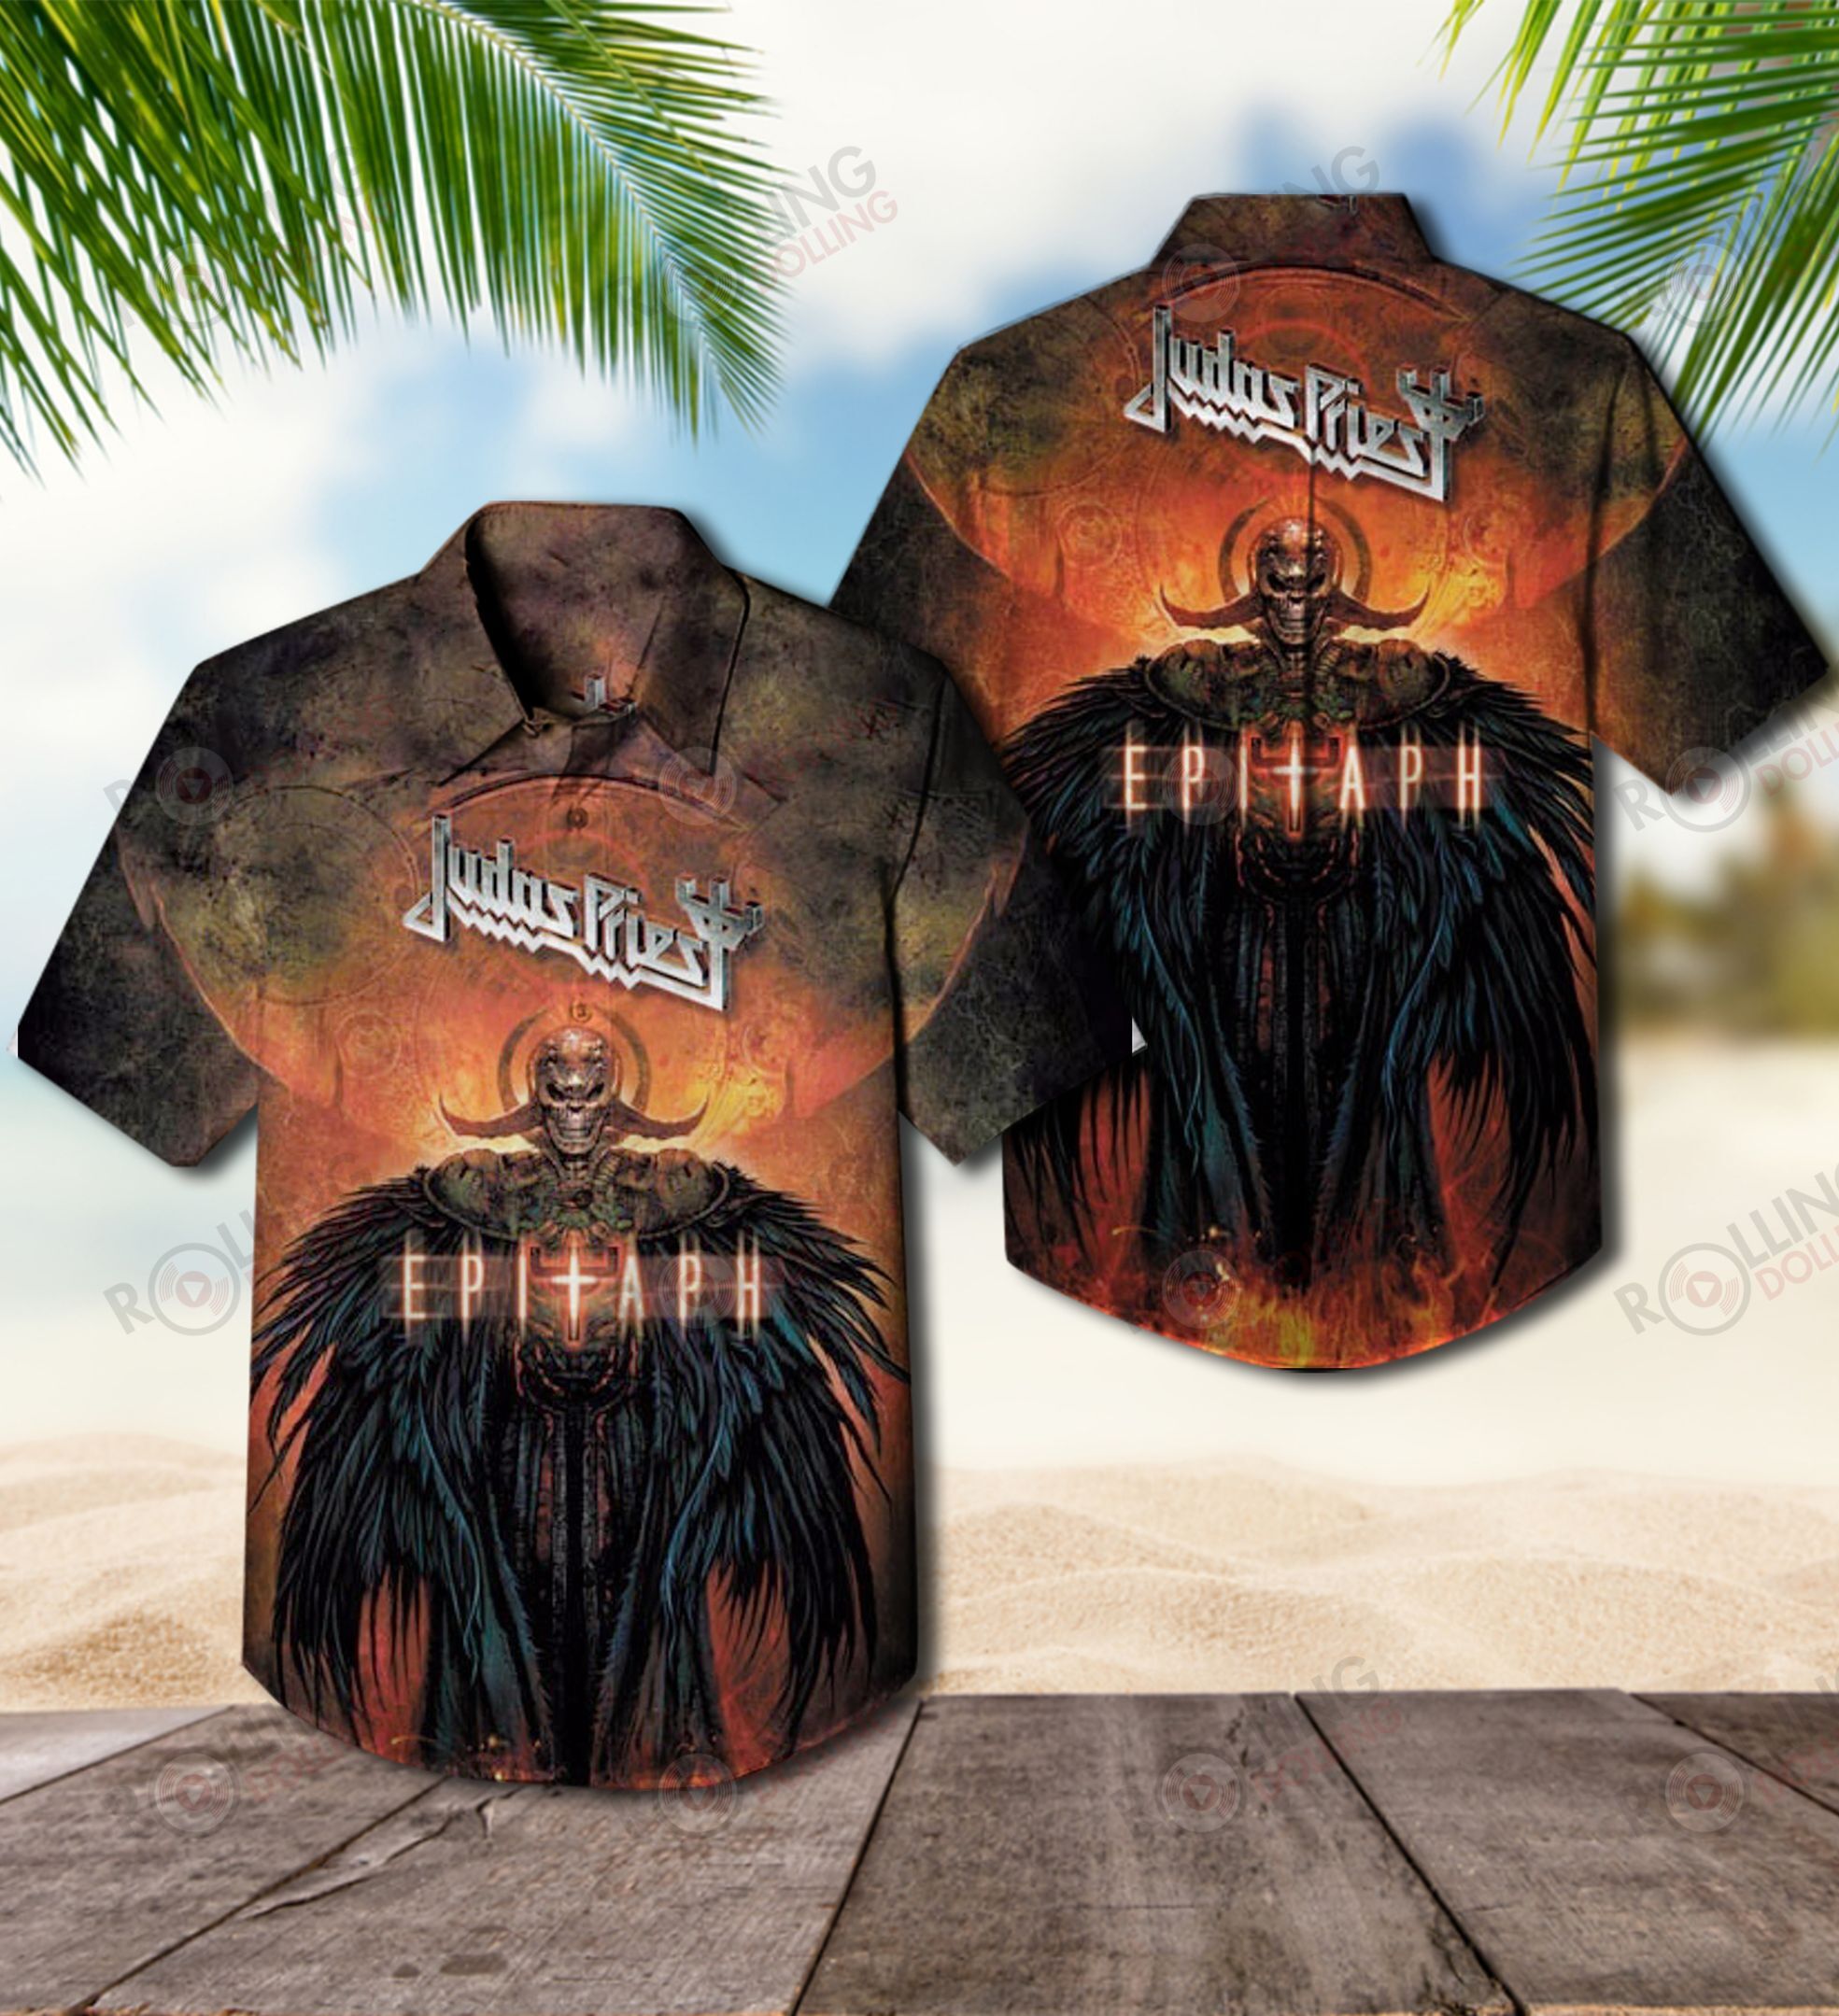 We have compiled a list of some of the best Hawaiian shirt that are available 451